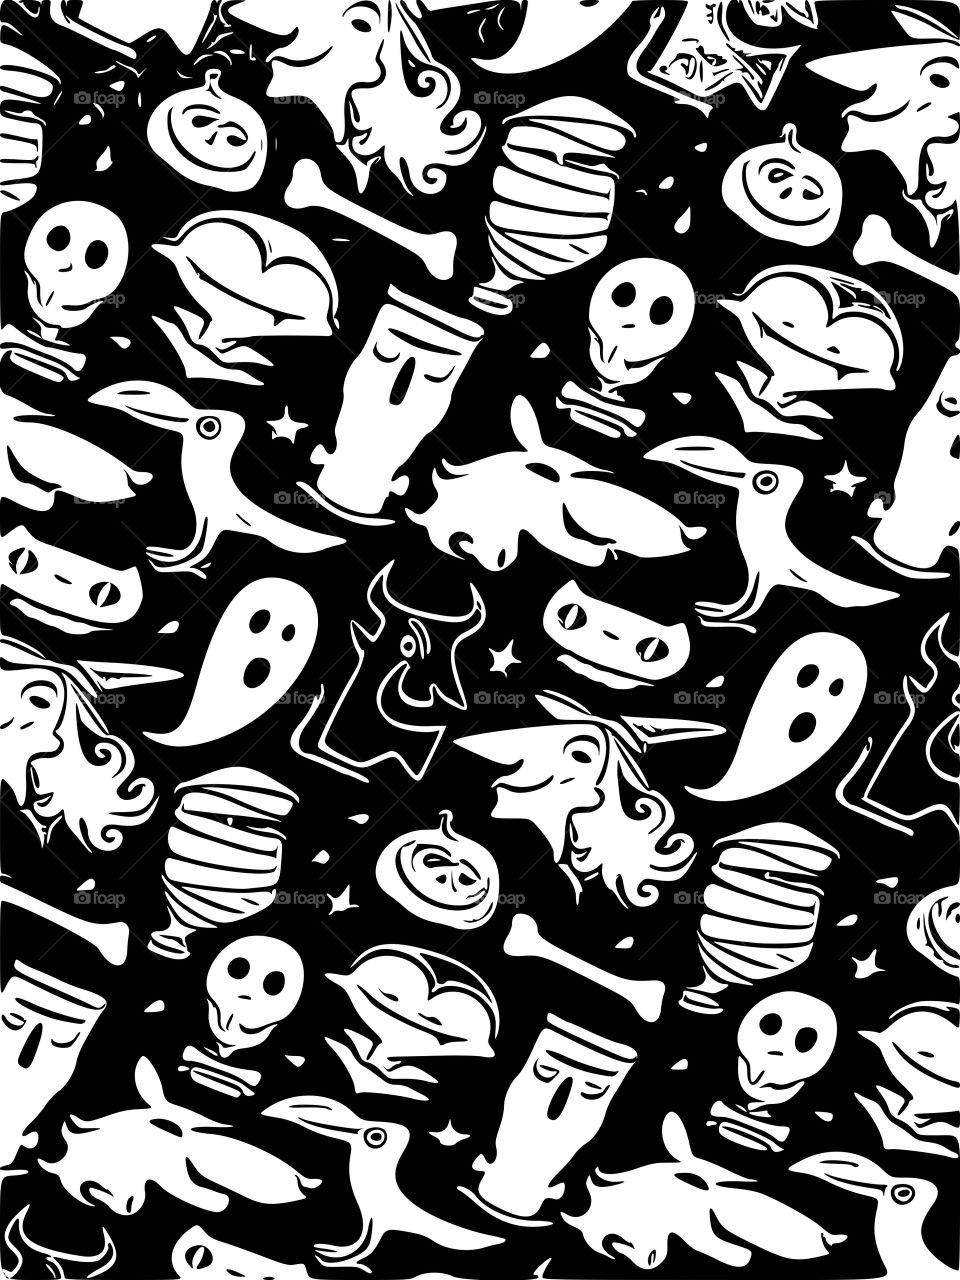 Halloween . Halloween image useful as a background pattern or Texture. 